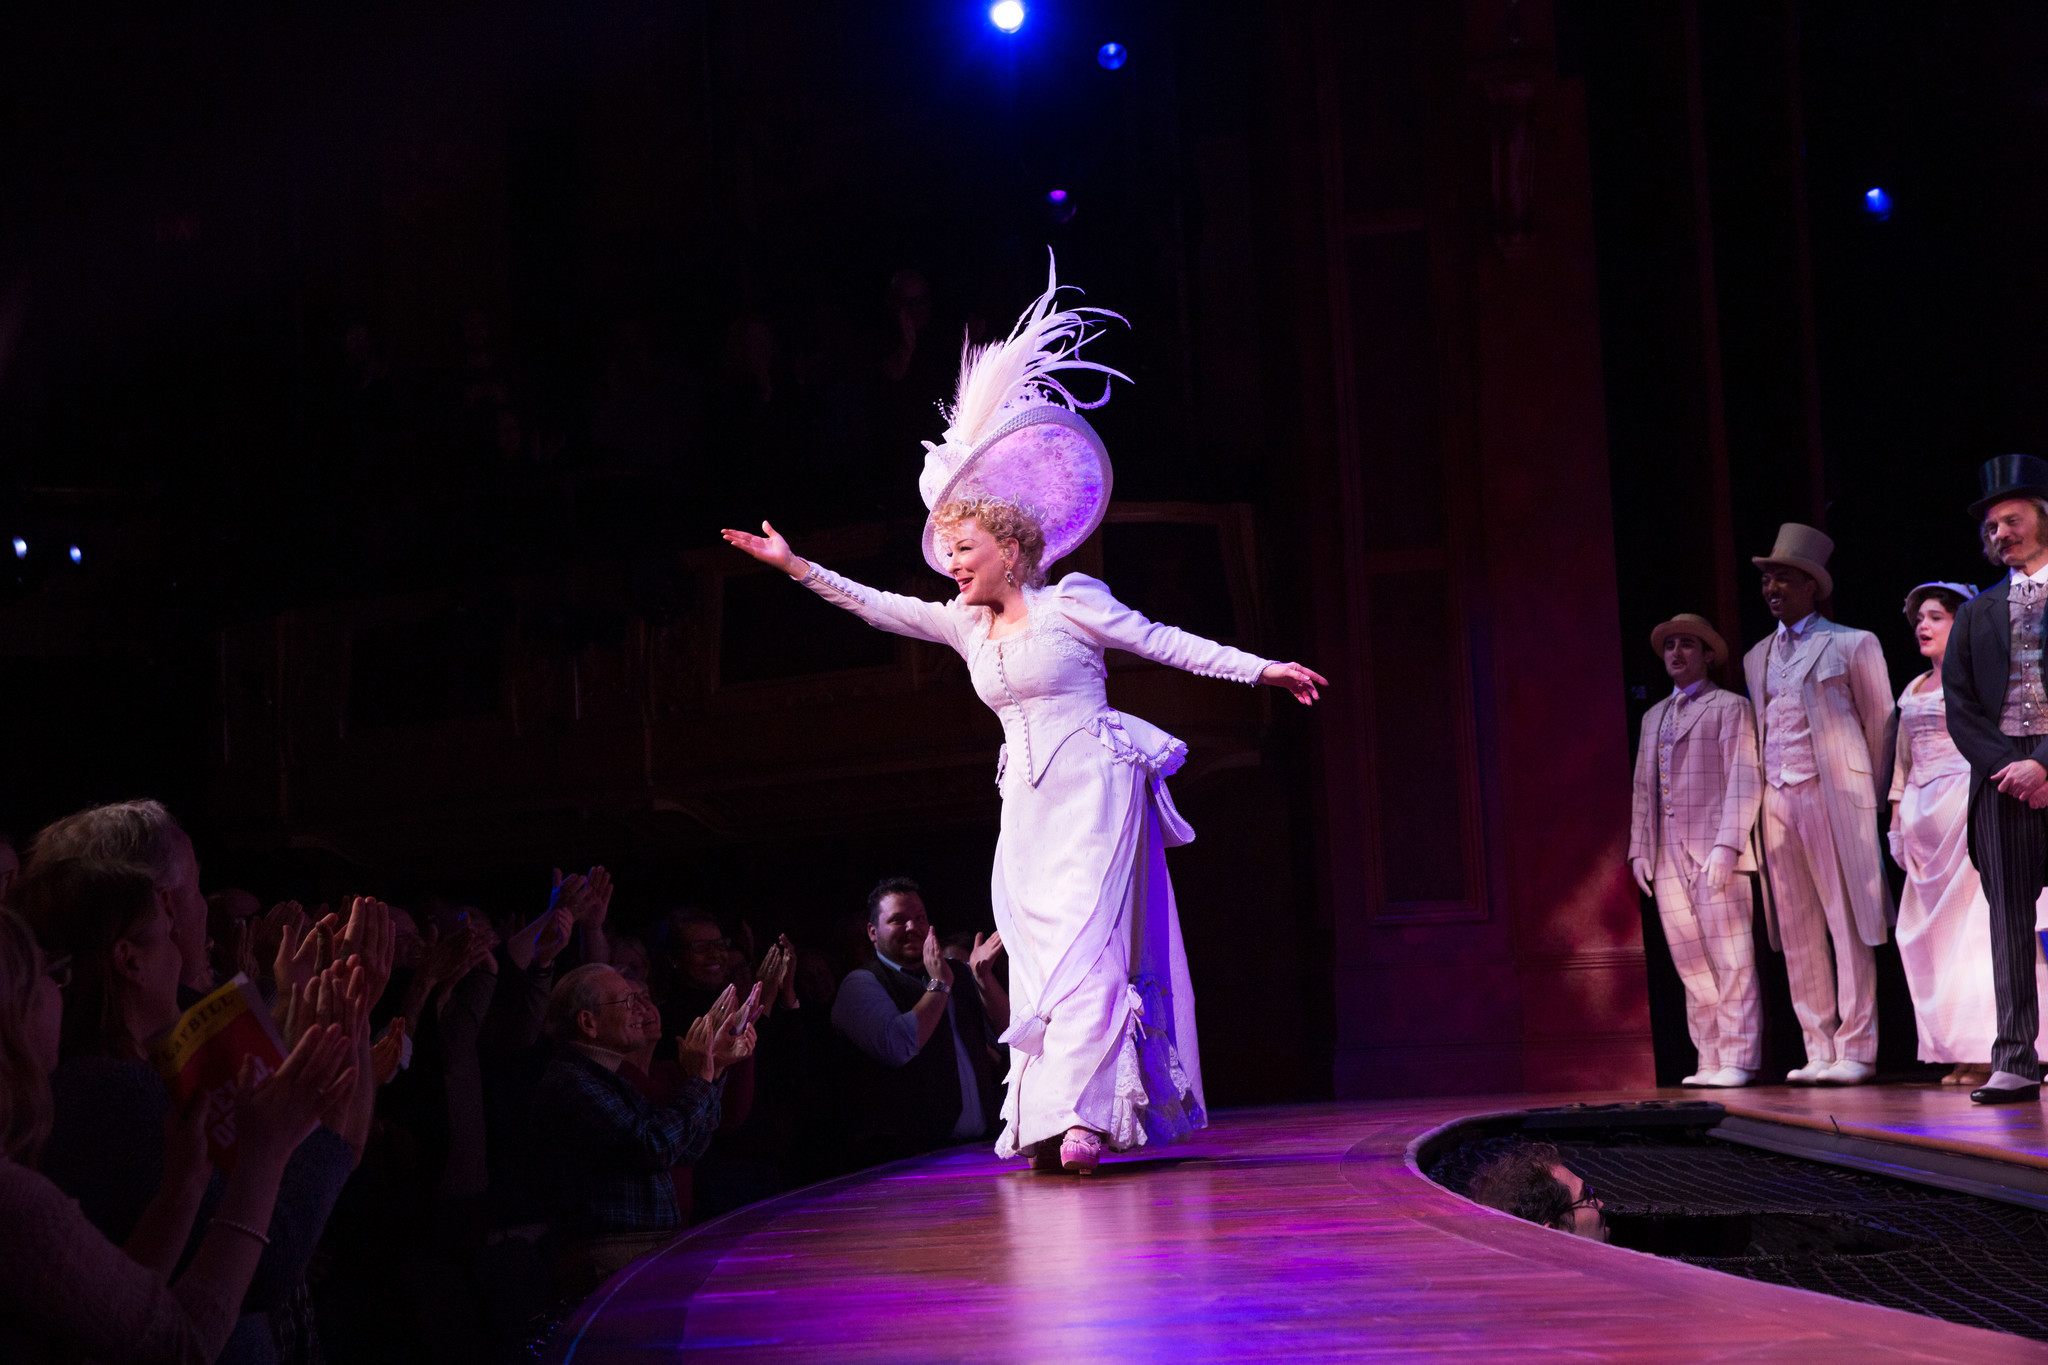 Midler accepts an ovation. Will she receive a Tony too?